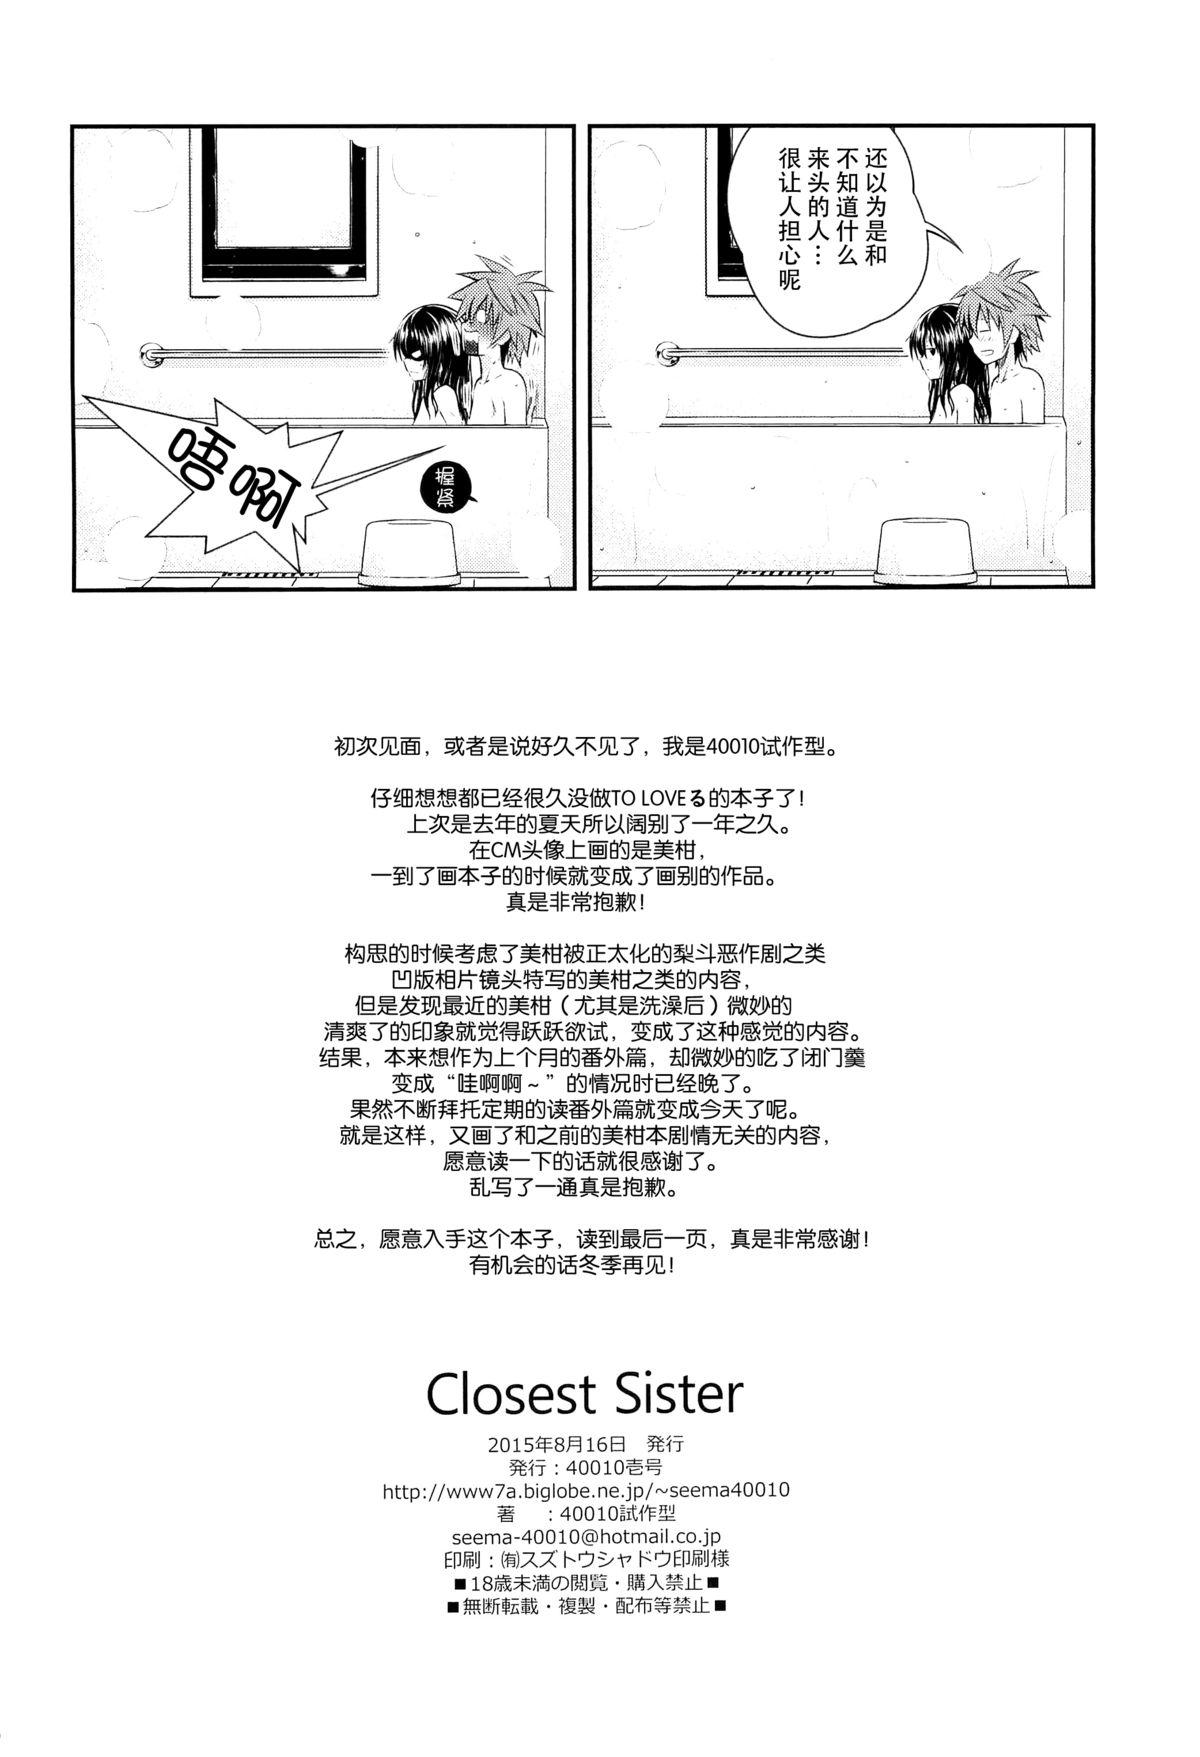 Closest Sister 29